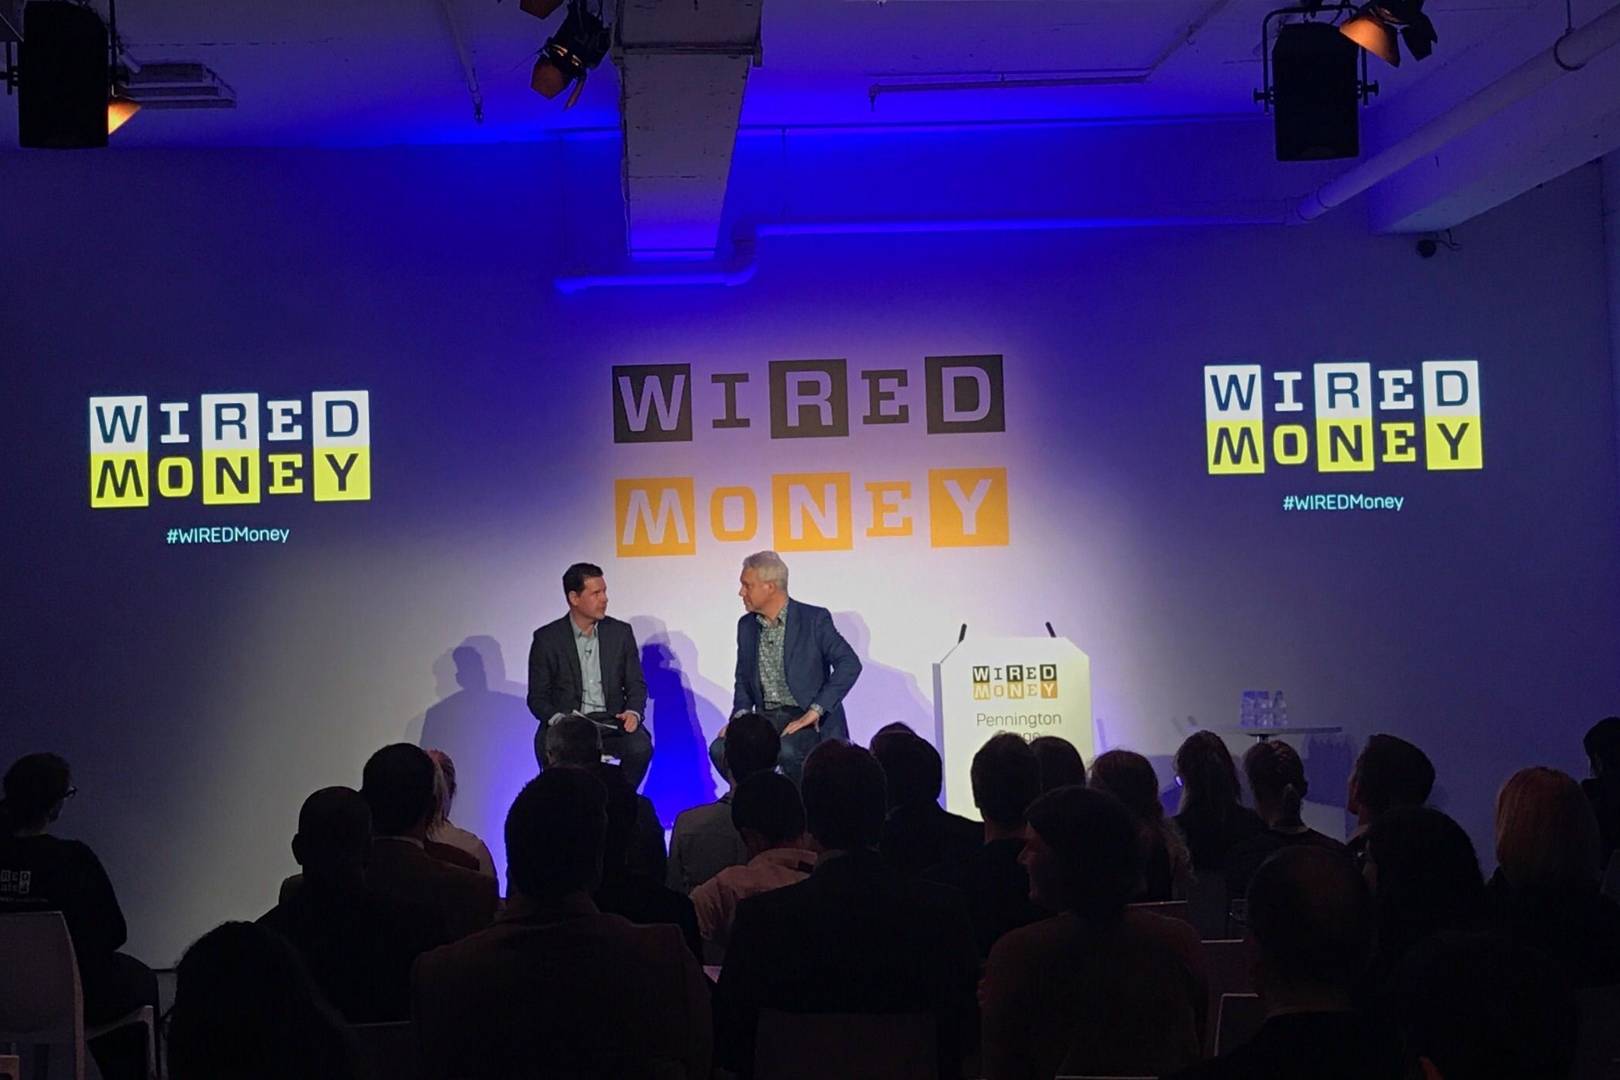 Highlights from WIRED Money 2017